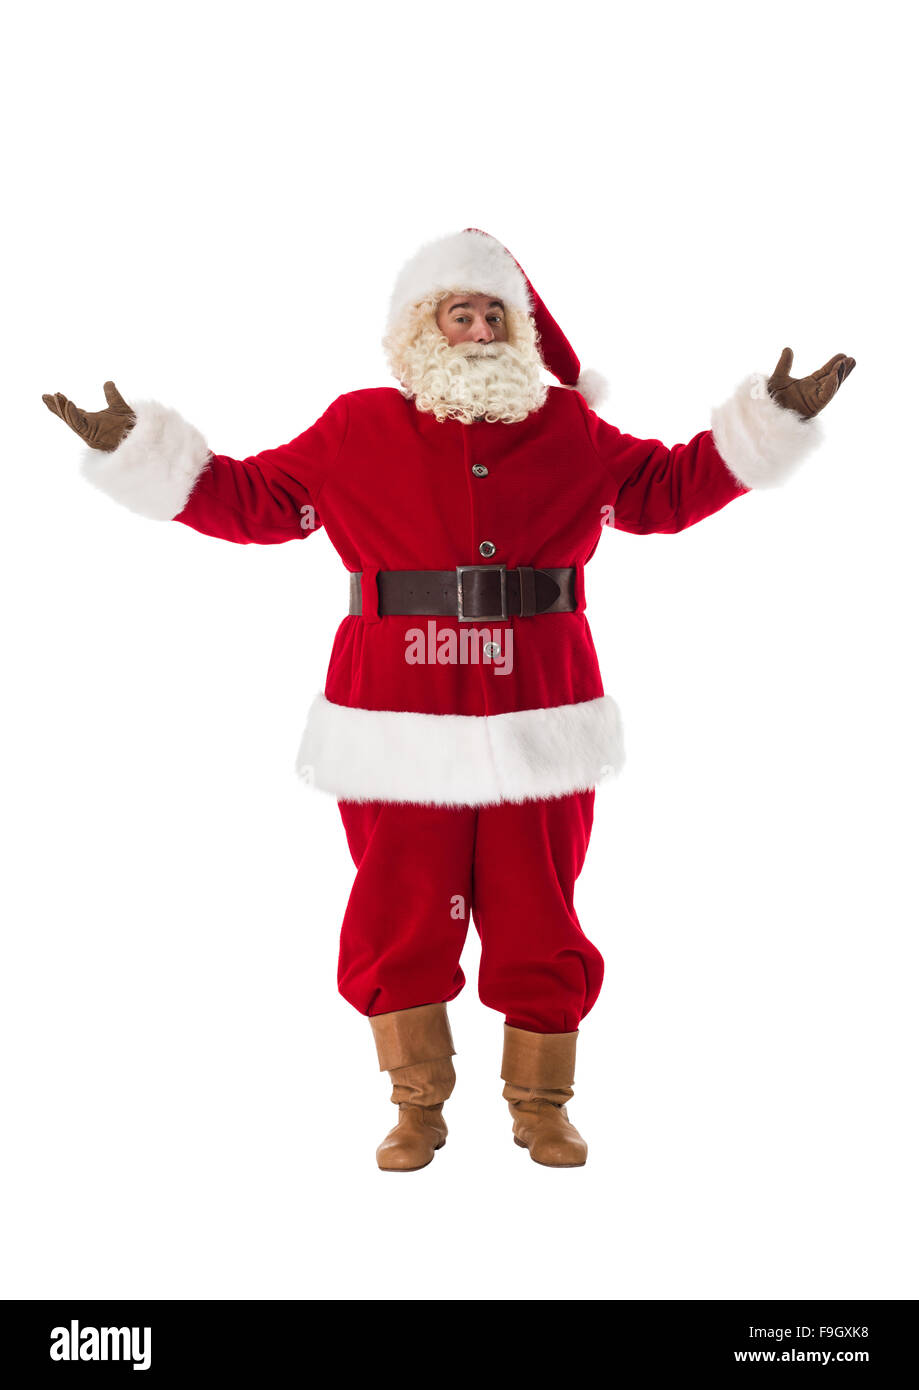 Santa Claus welcoming or presenting Full Length Portrait. Isolated on White Background Stock Photo